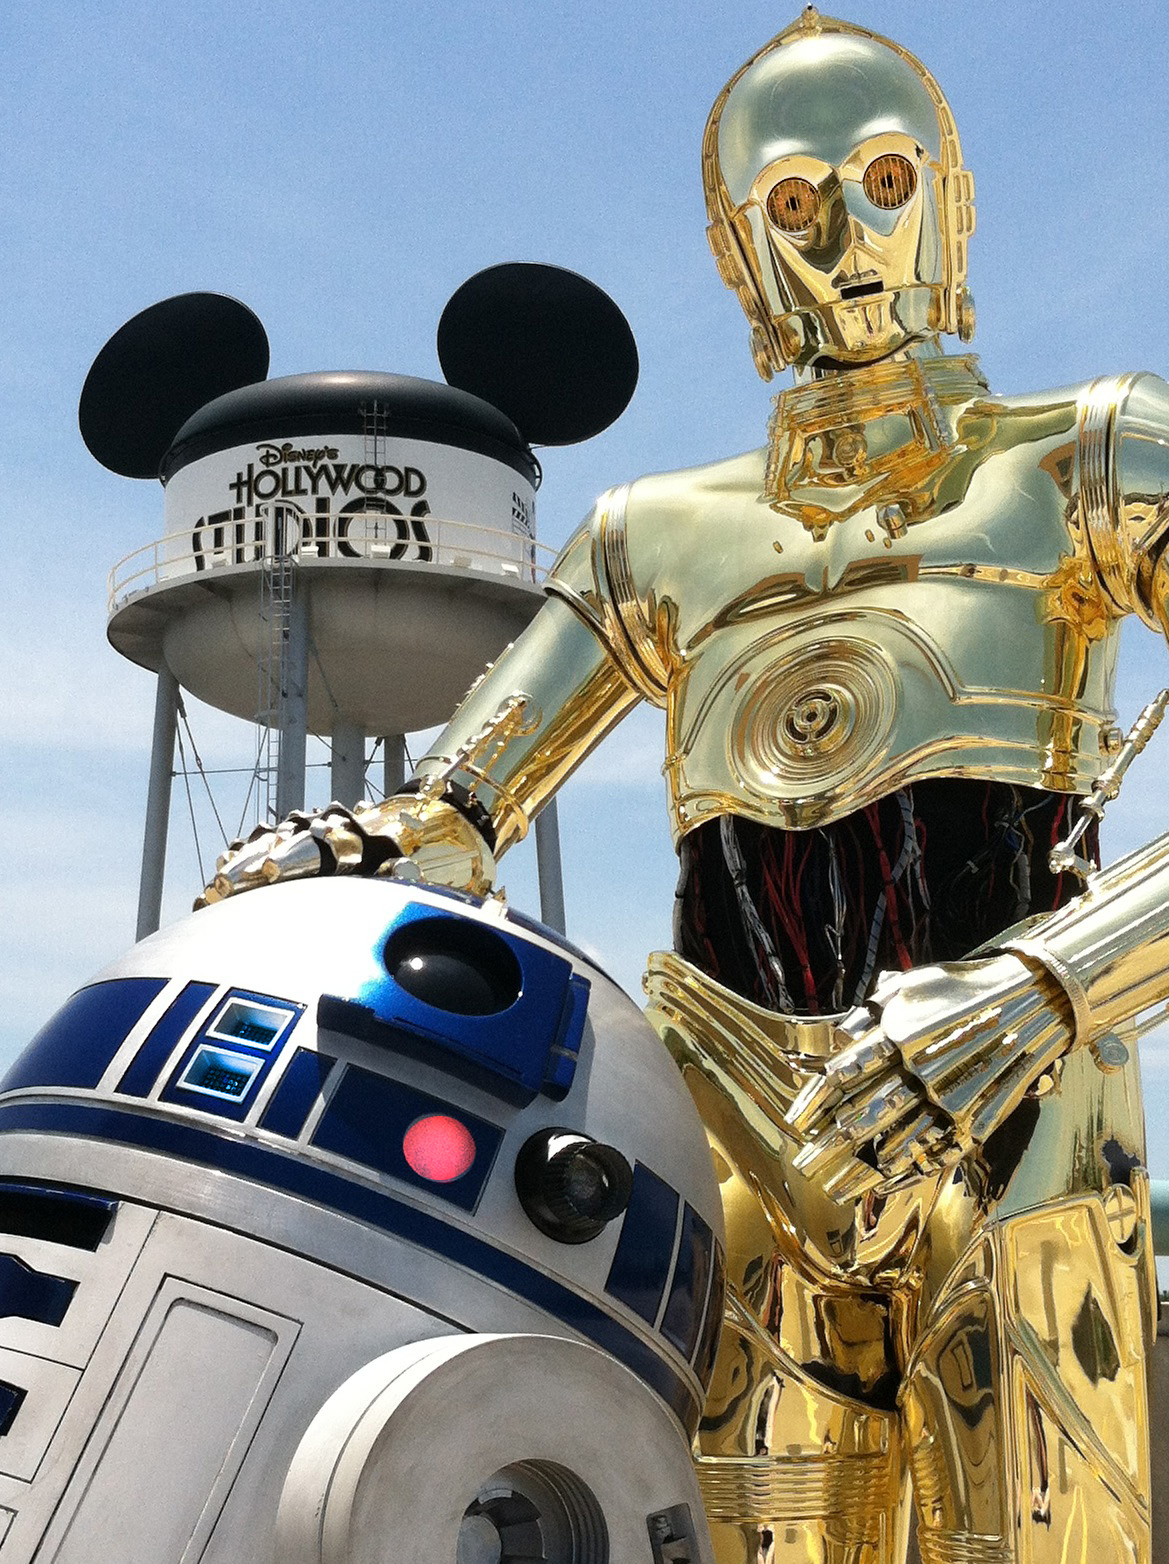 C-3PO and R2-D2 appear at Disney's Hollywood Studios in Orlando, Florida for Star Wars Weekends (Chris F. Bartlett as C-3PO)